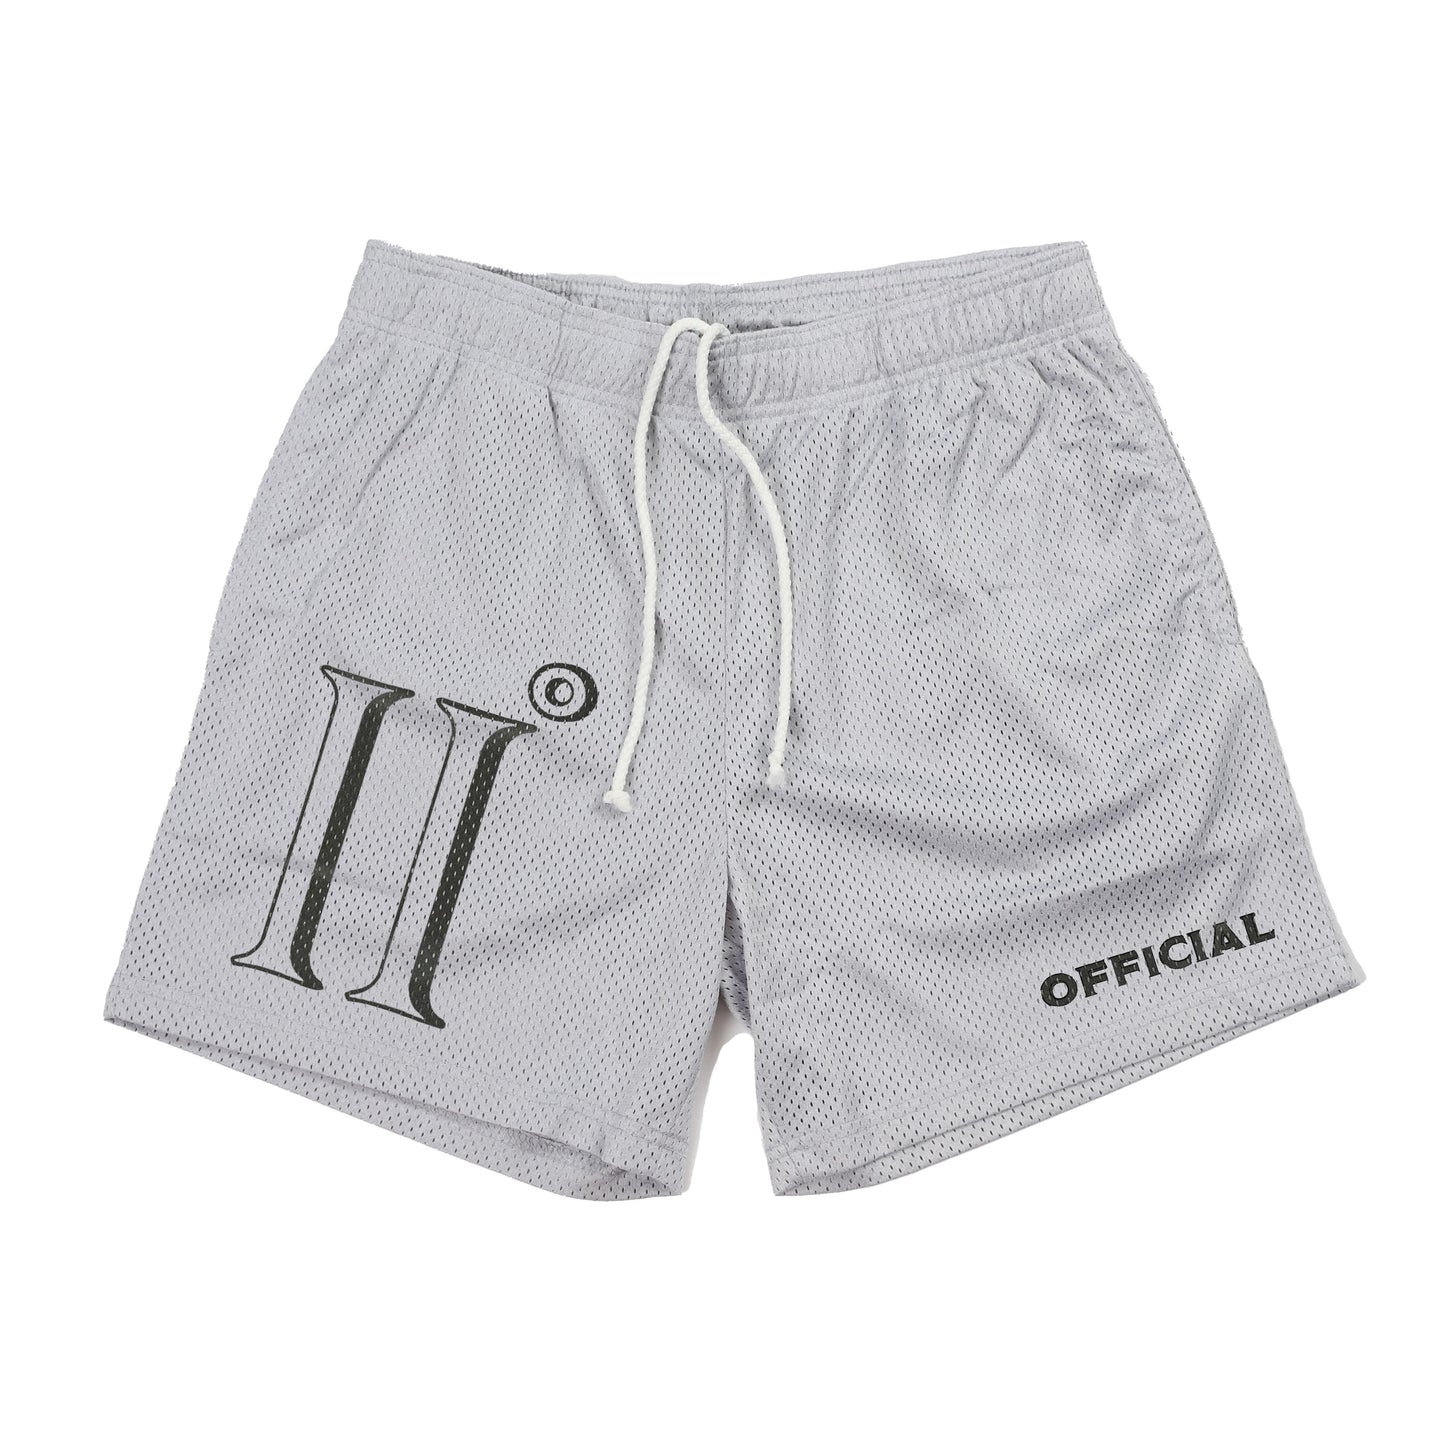 II Degrees Official Shorts